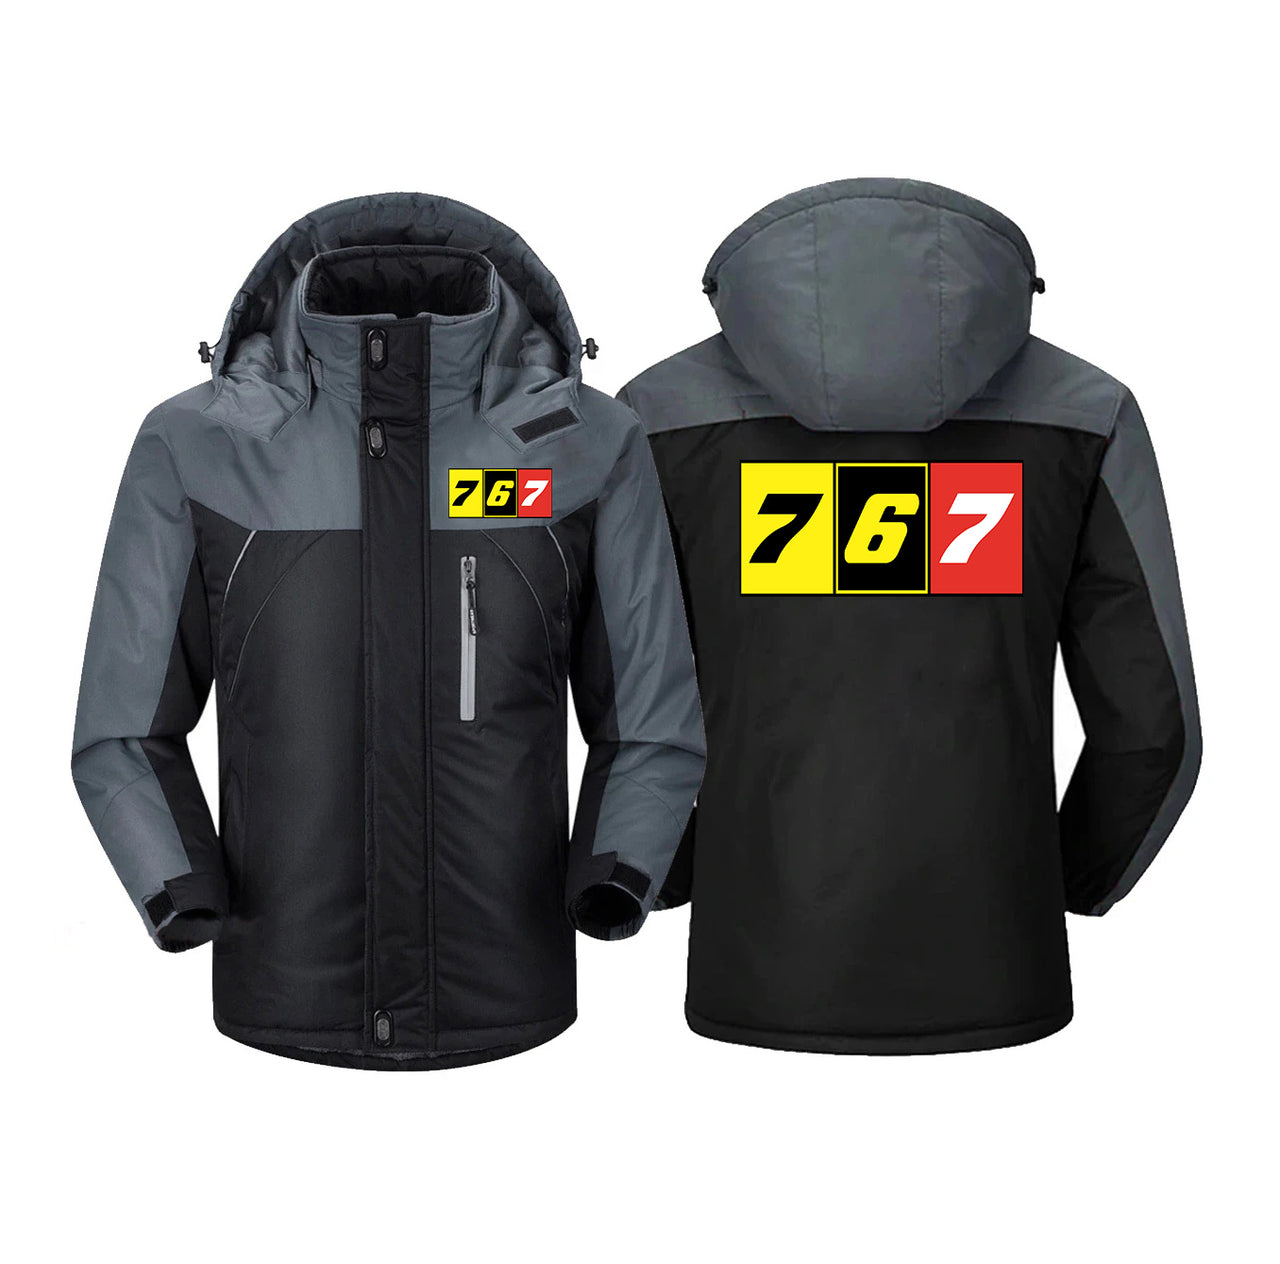 Flat Colourful 767 Designed Thick Winter Jackets